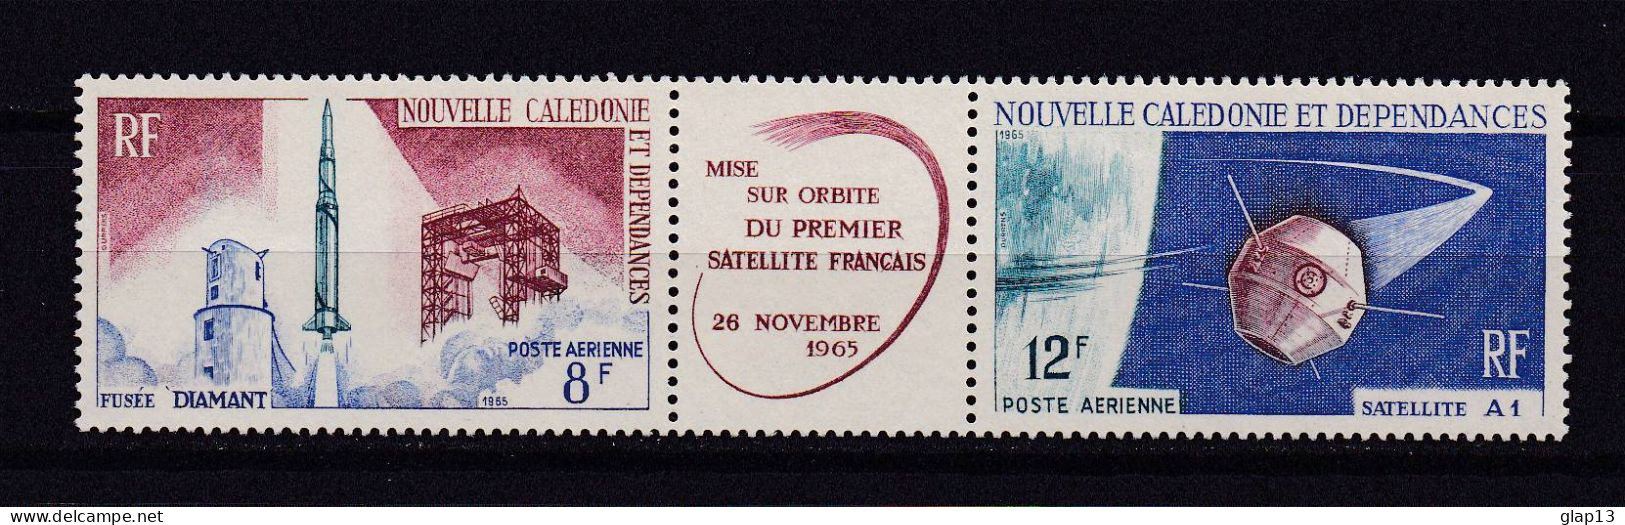 NOUVELLE-CALEDONIE 1966 PA N°85A NEUF AVEC CHARNIERE SATELLITE - Nuevos